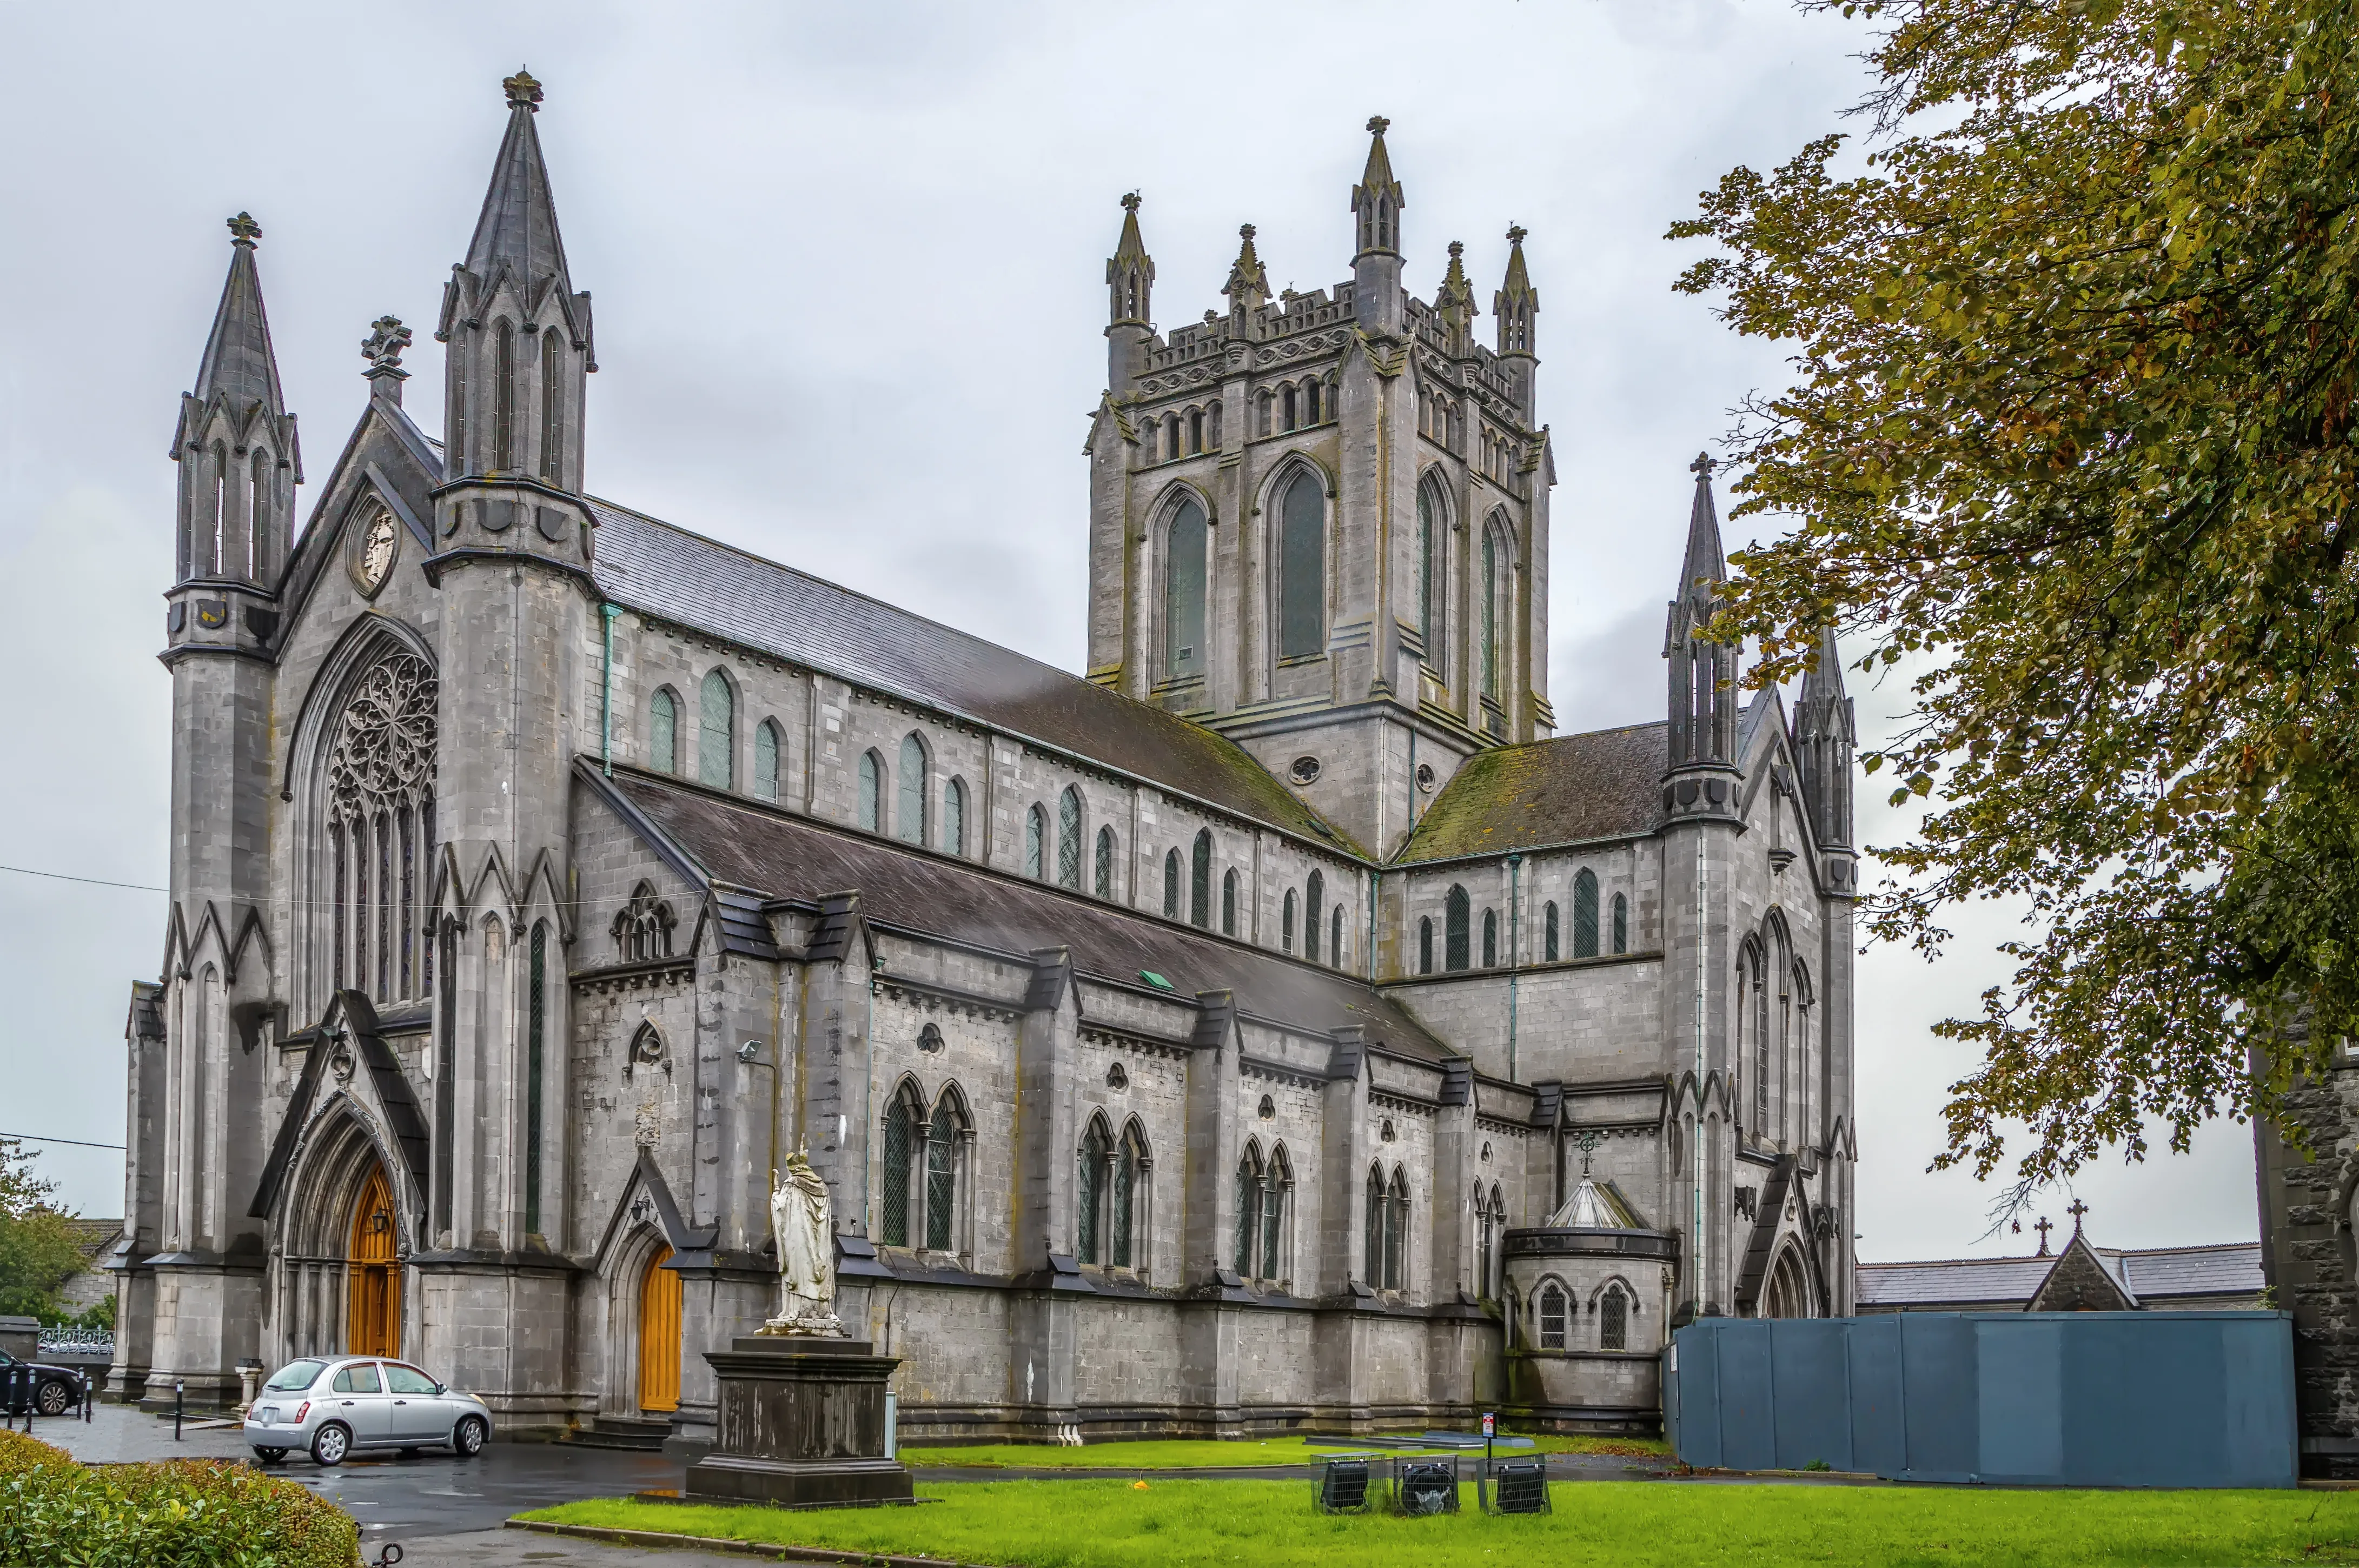 St Mary’s is the cathedral church of the Roman Catholic Diocese of Ossory. It is situated on James’s Street, Kilkenny, Ireland.?w=200&h=150